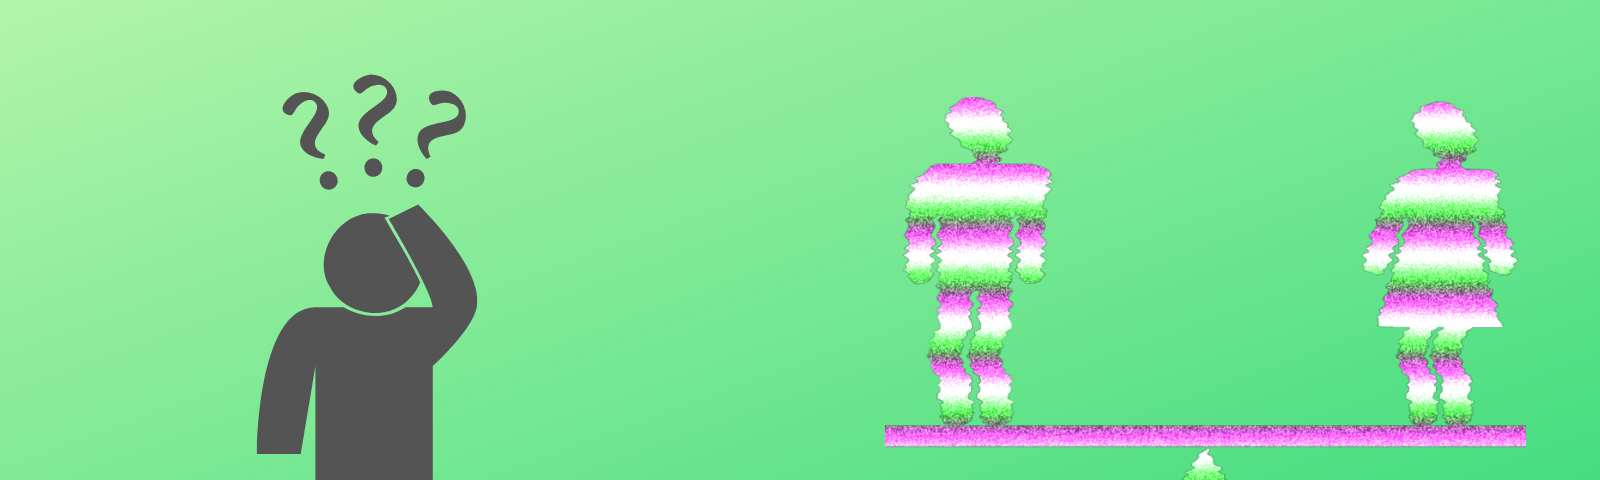 Simple illustration of green gradient background with gray block person and question marks over their head next to a seesaw with glitched purple, white, and green block man and woman